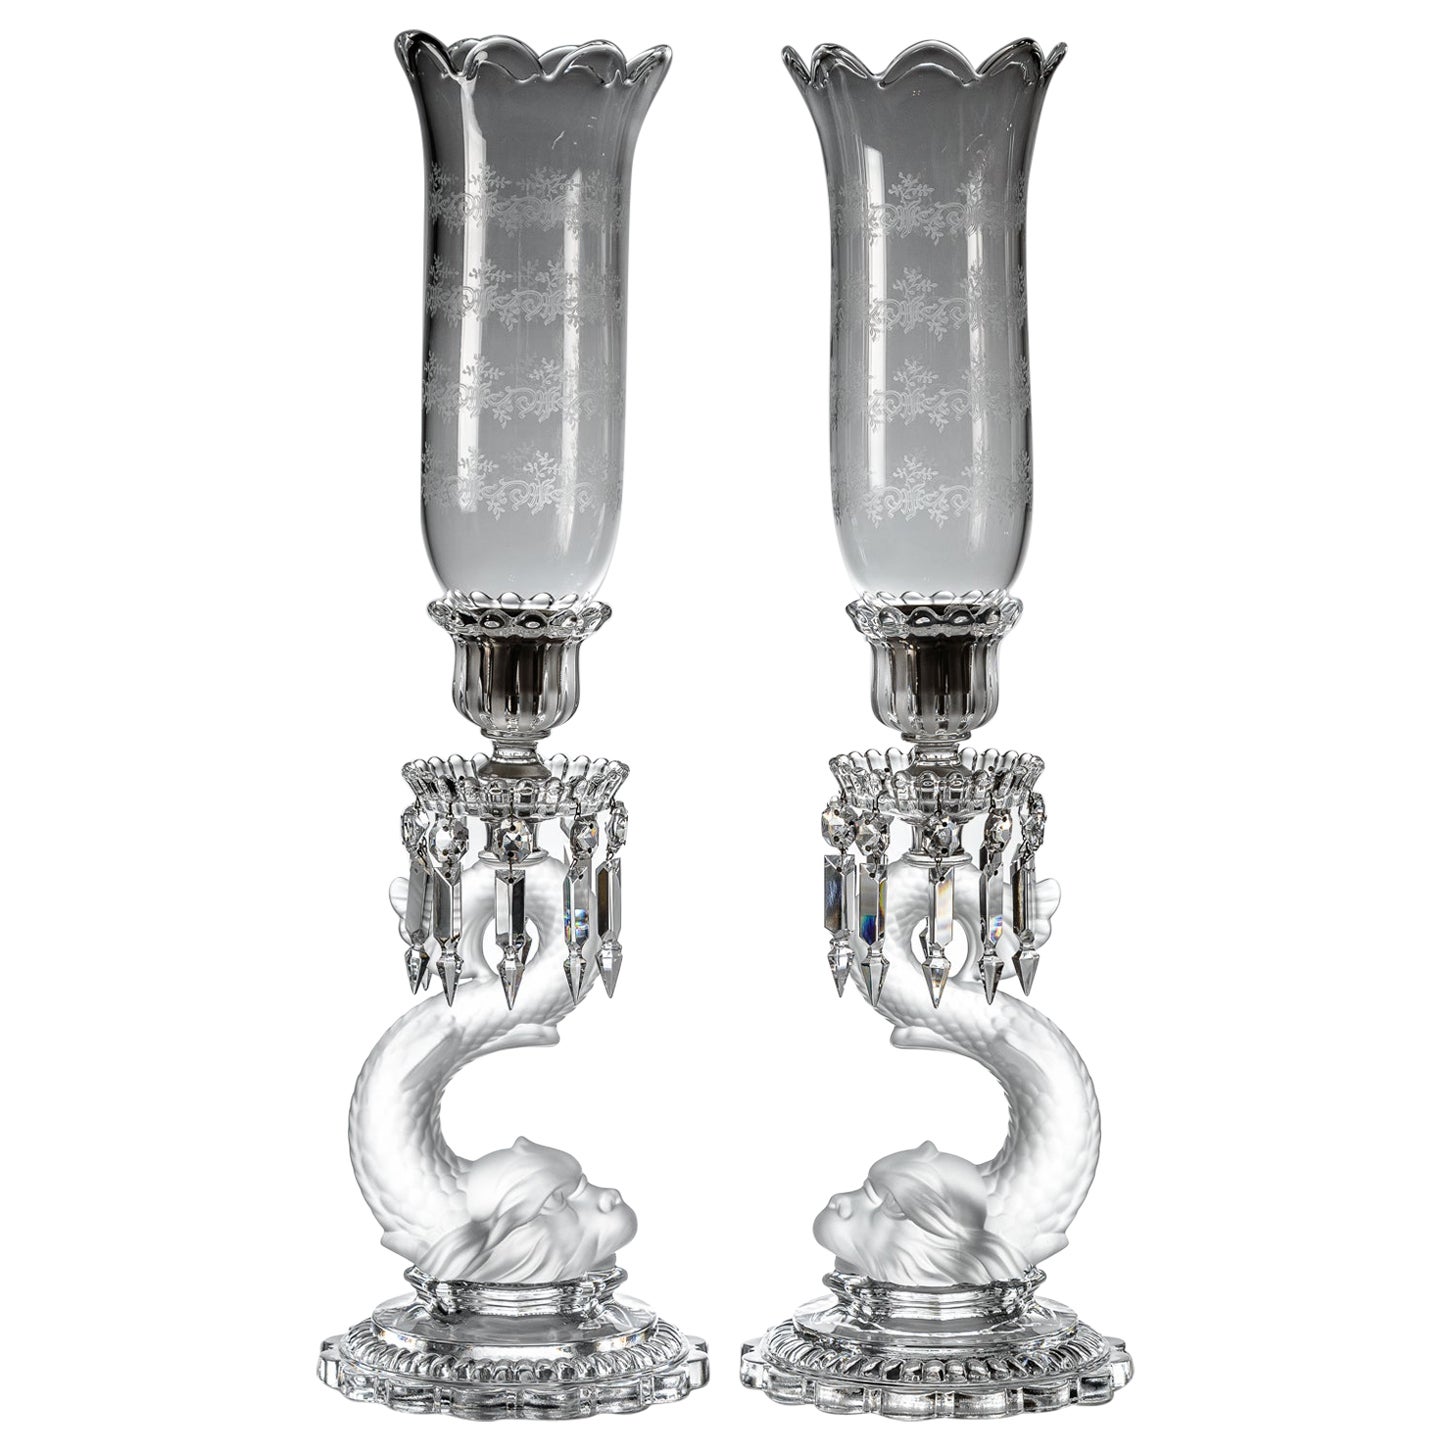 Pair Baccarat Dolphin Candelabras, Vintage With Tall Hurricane Crystal Shades